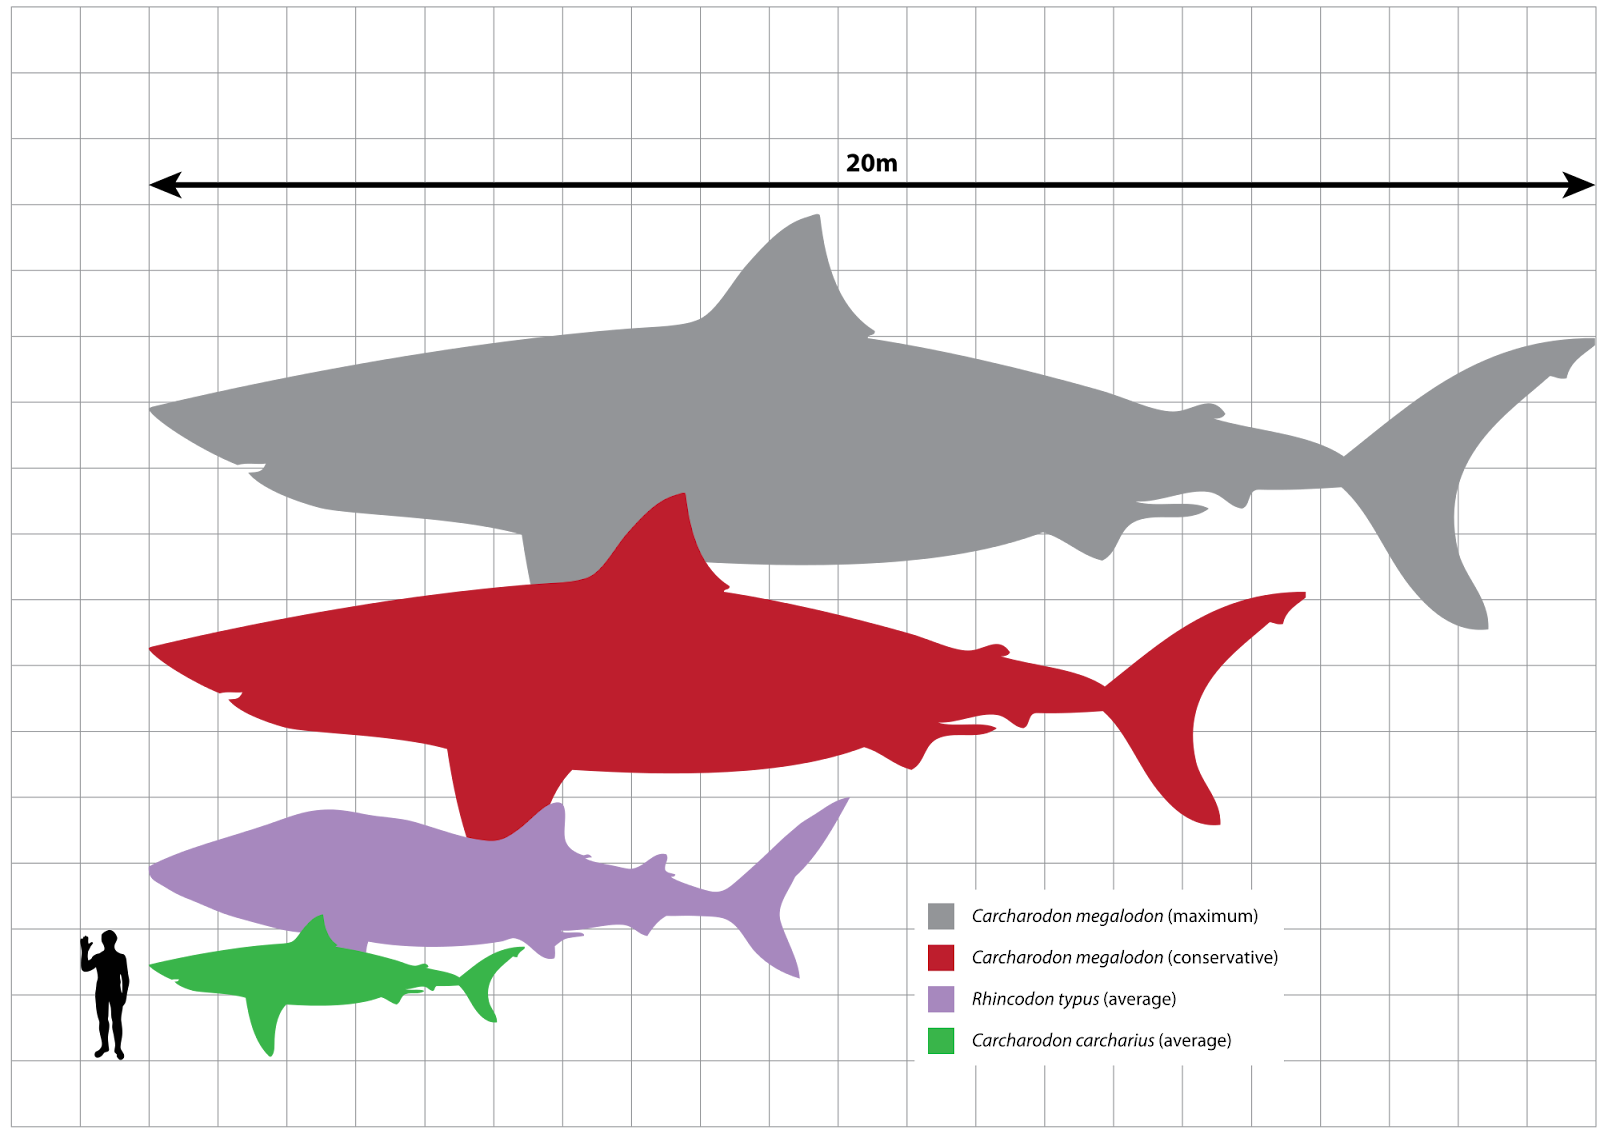 https://upload.wikimedia.org/wikipedia/commons/thumb/4/4d/Megalodon_scale.svg/2000px-Megalodon_scale.svg.png